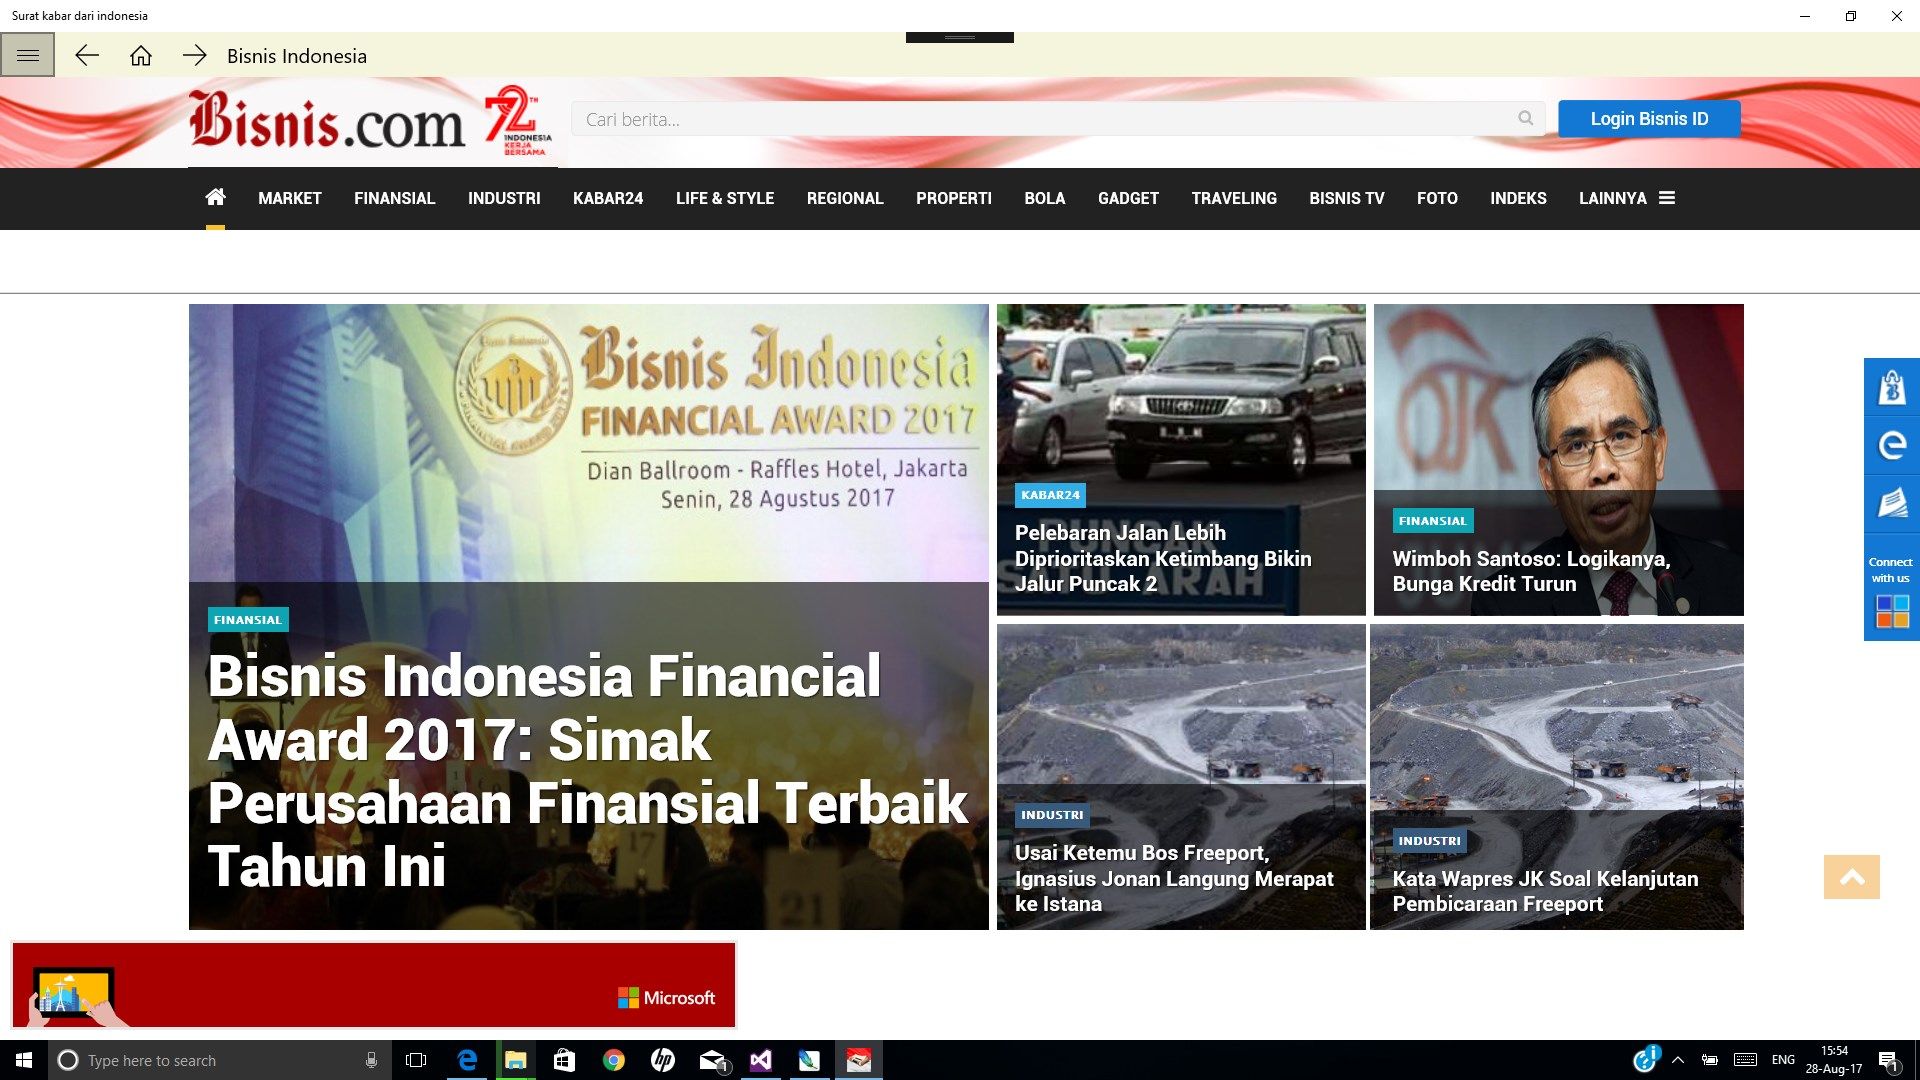 News from Indonesia